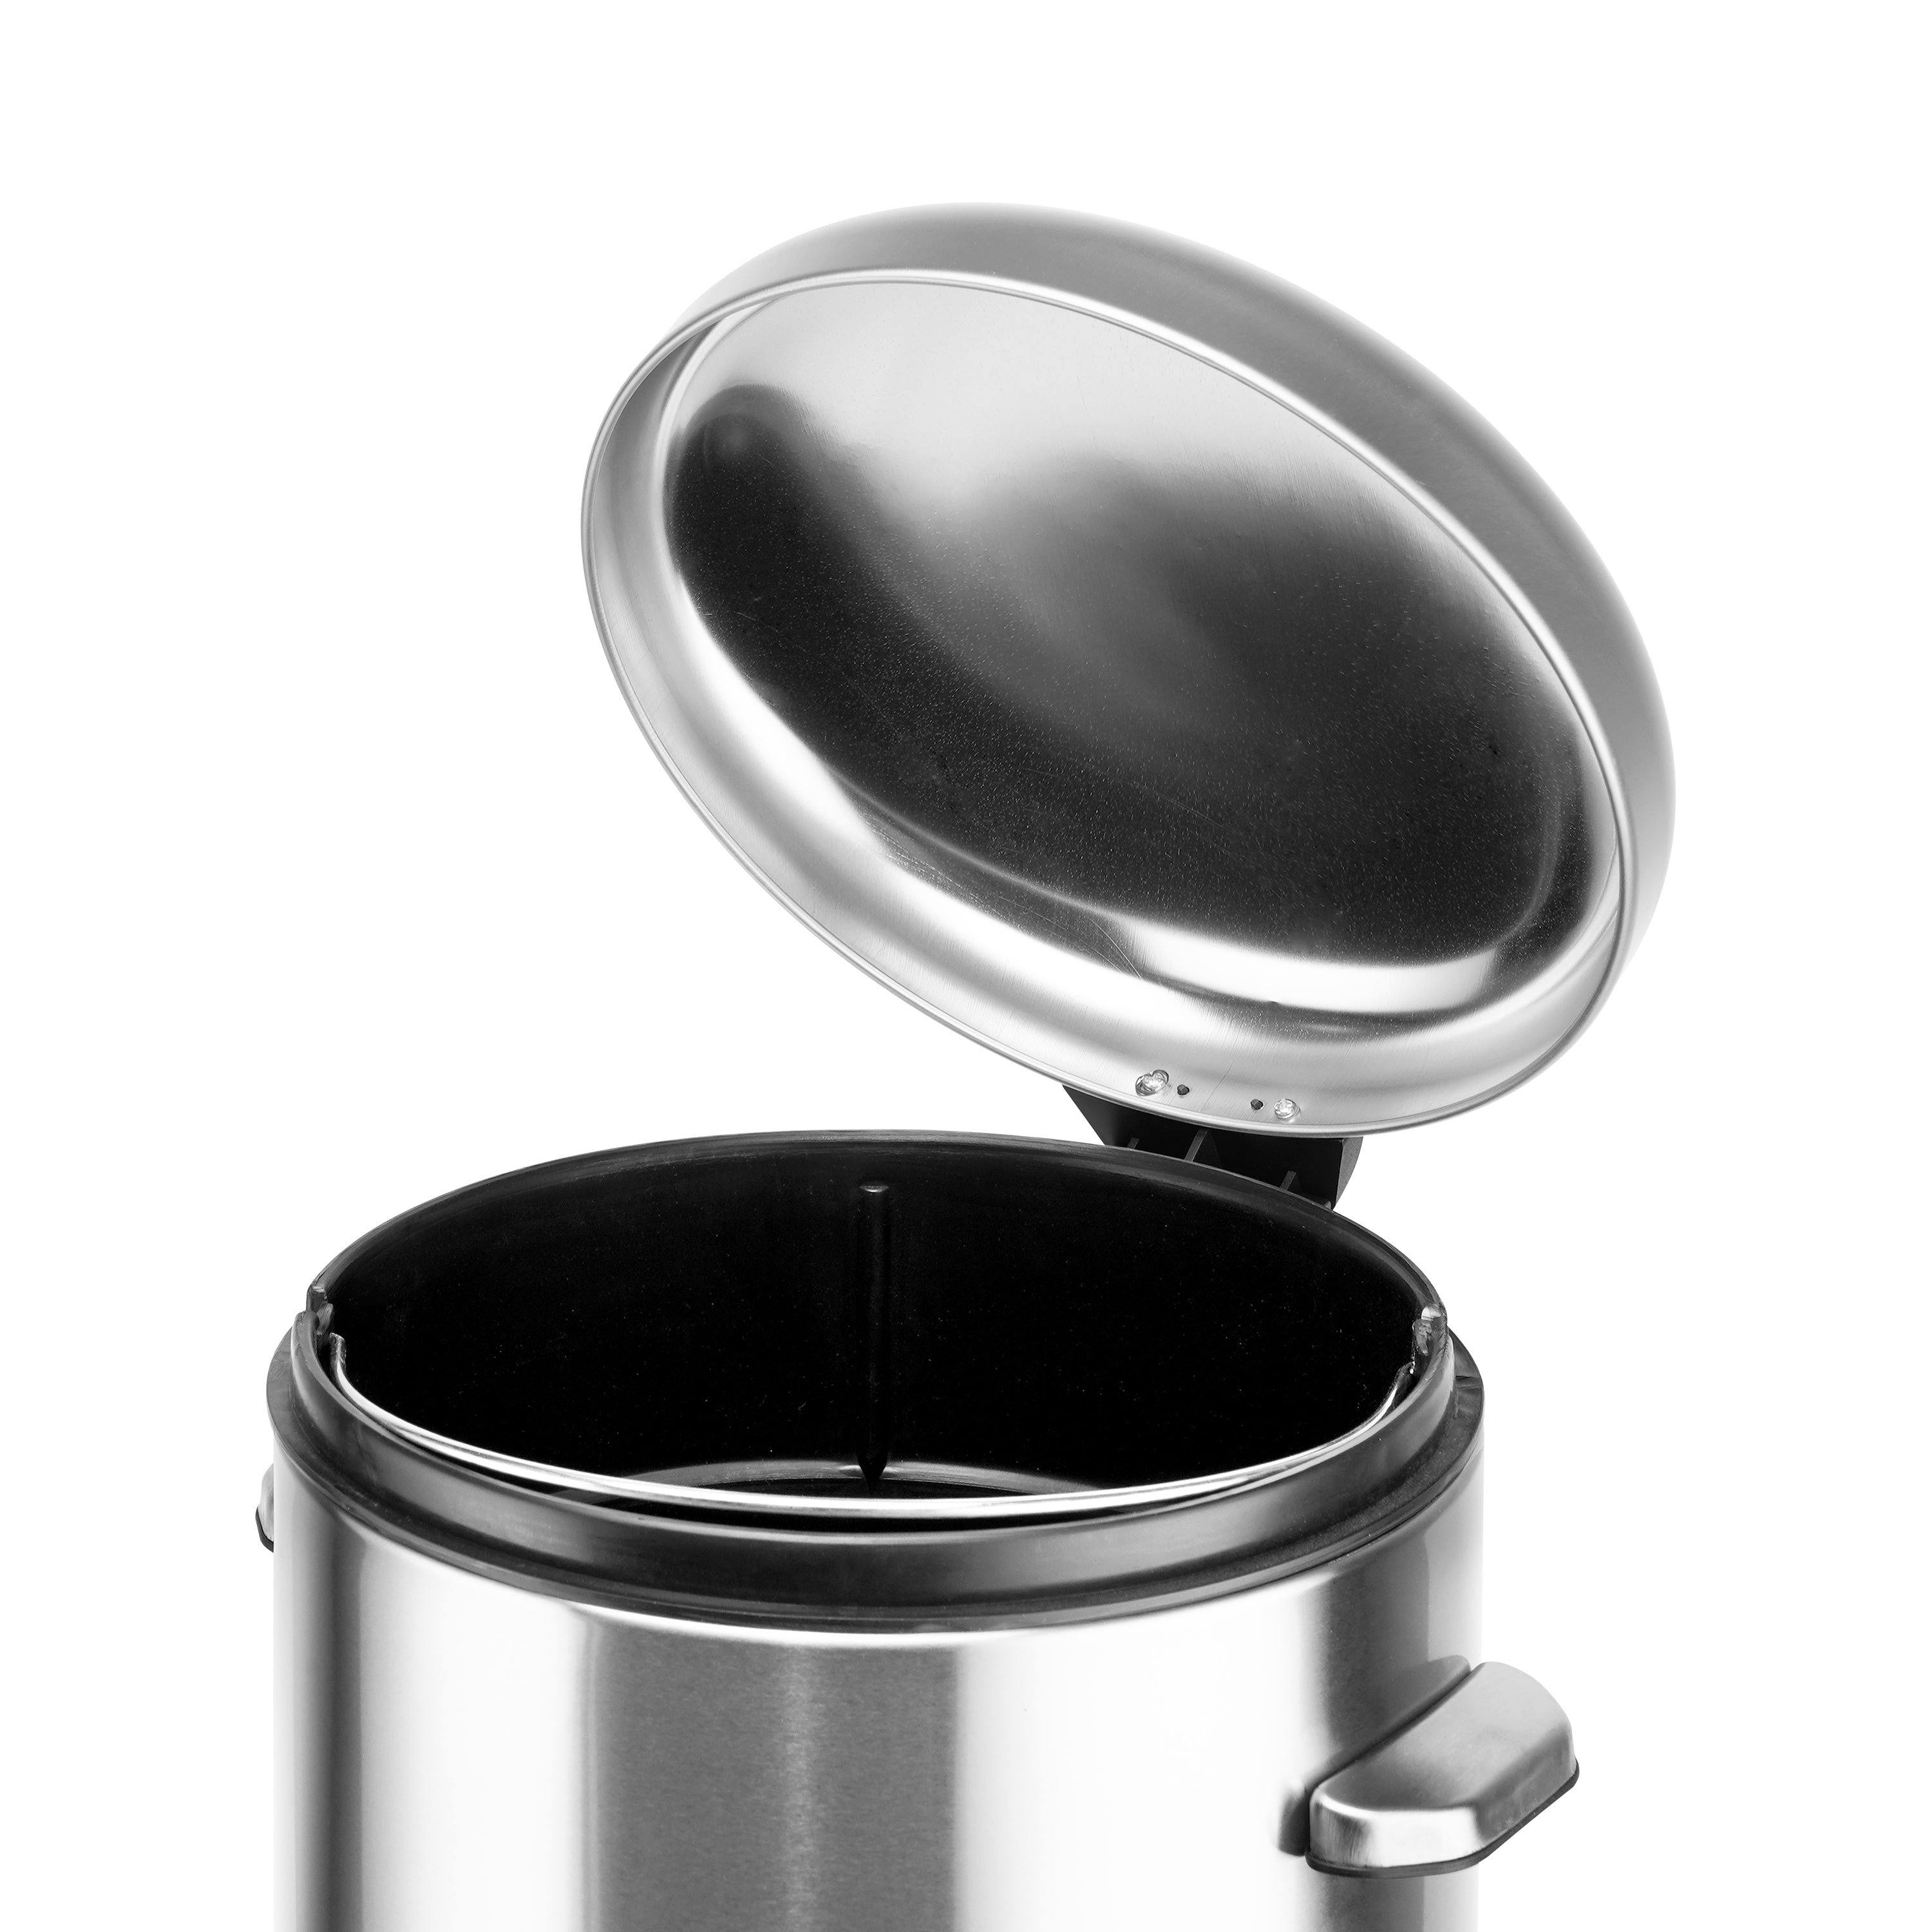 8 Gal. Stainless Steel Round Step-On Trash Can